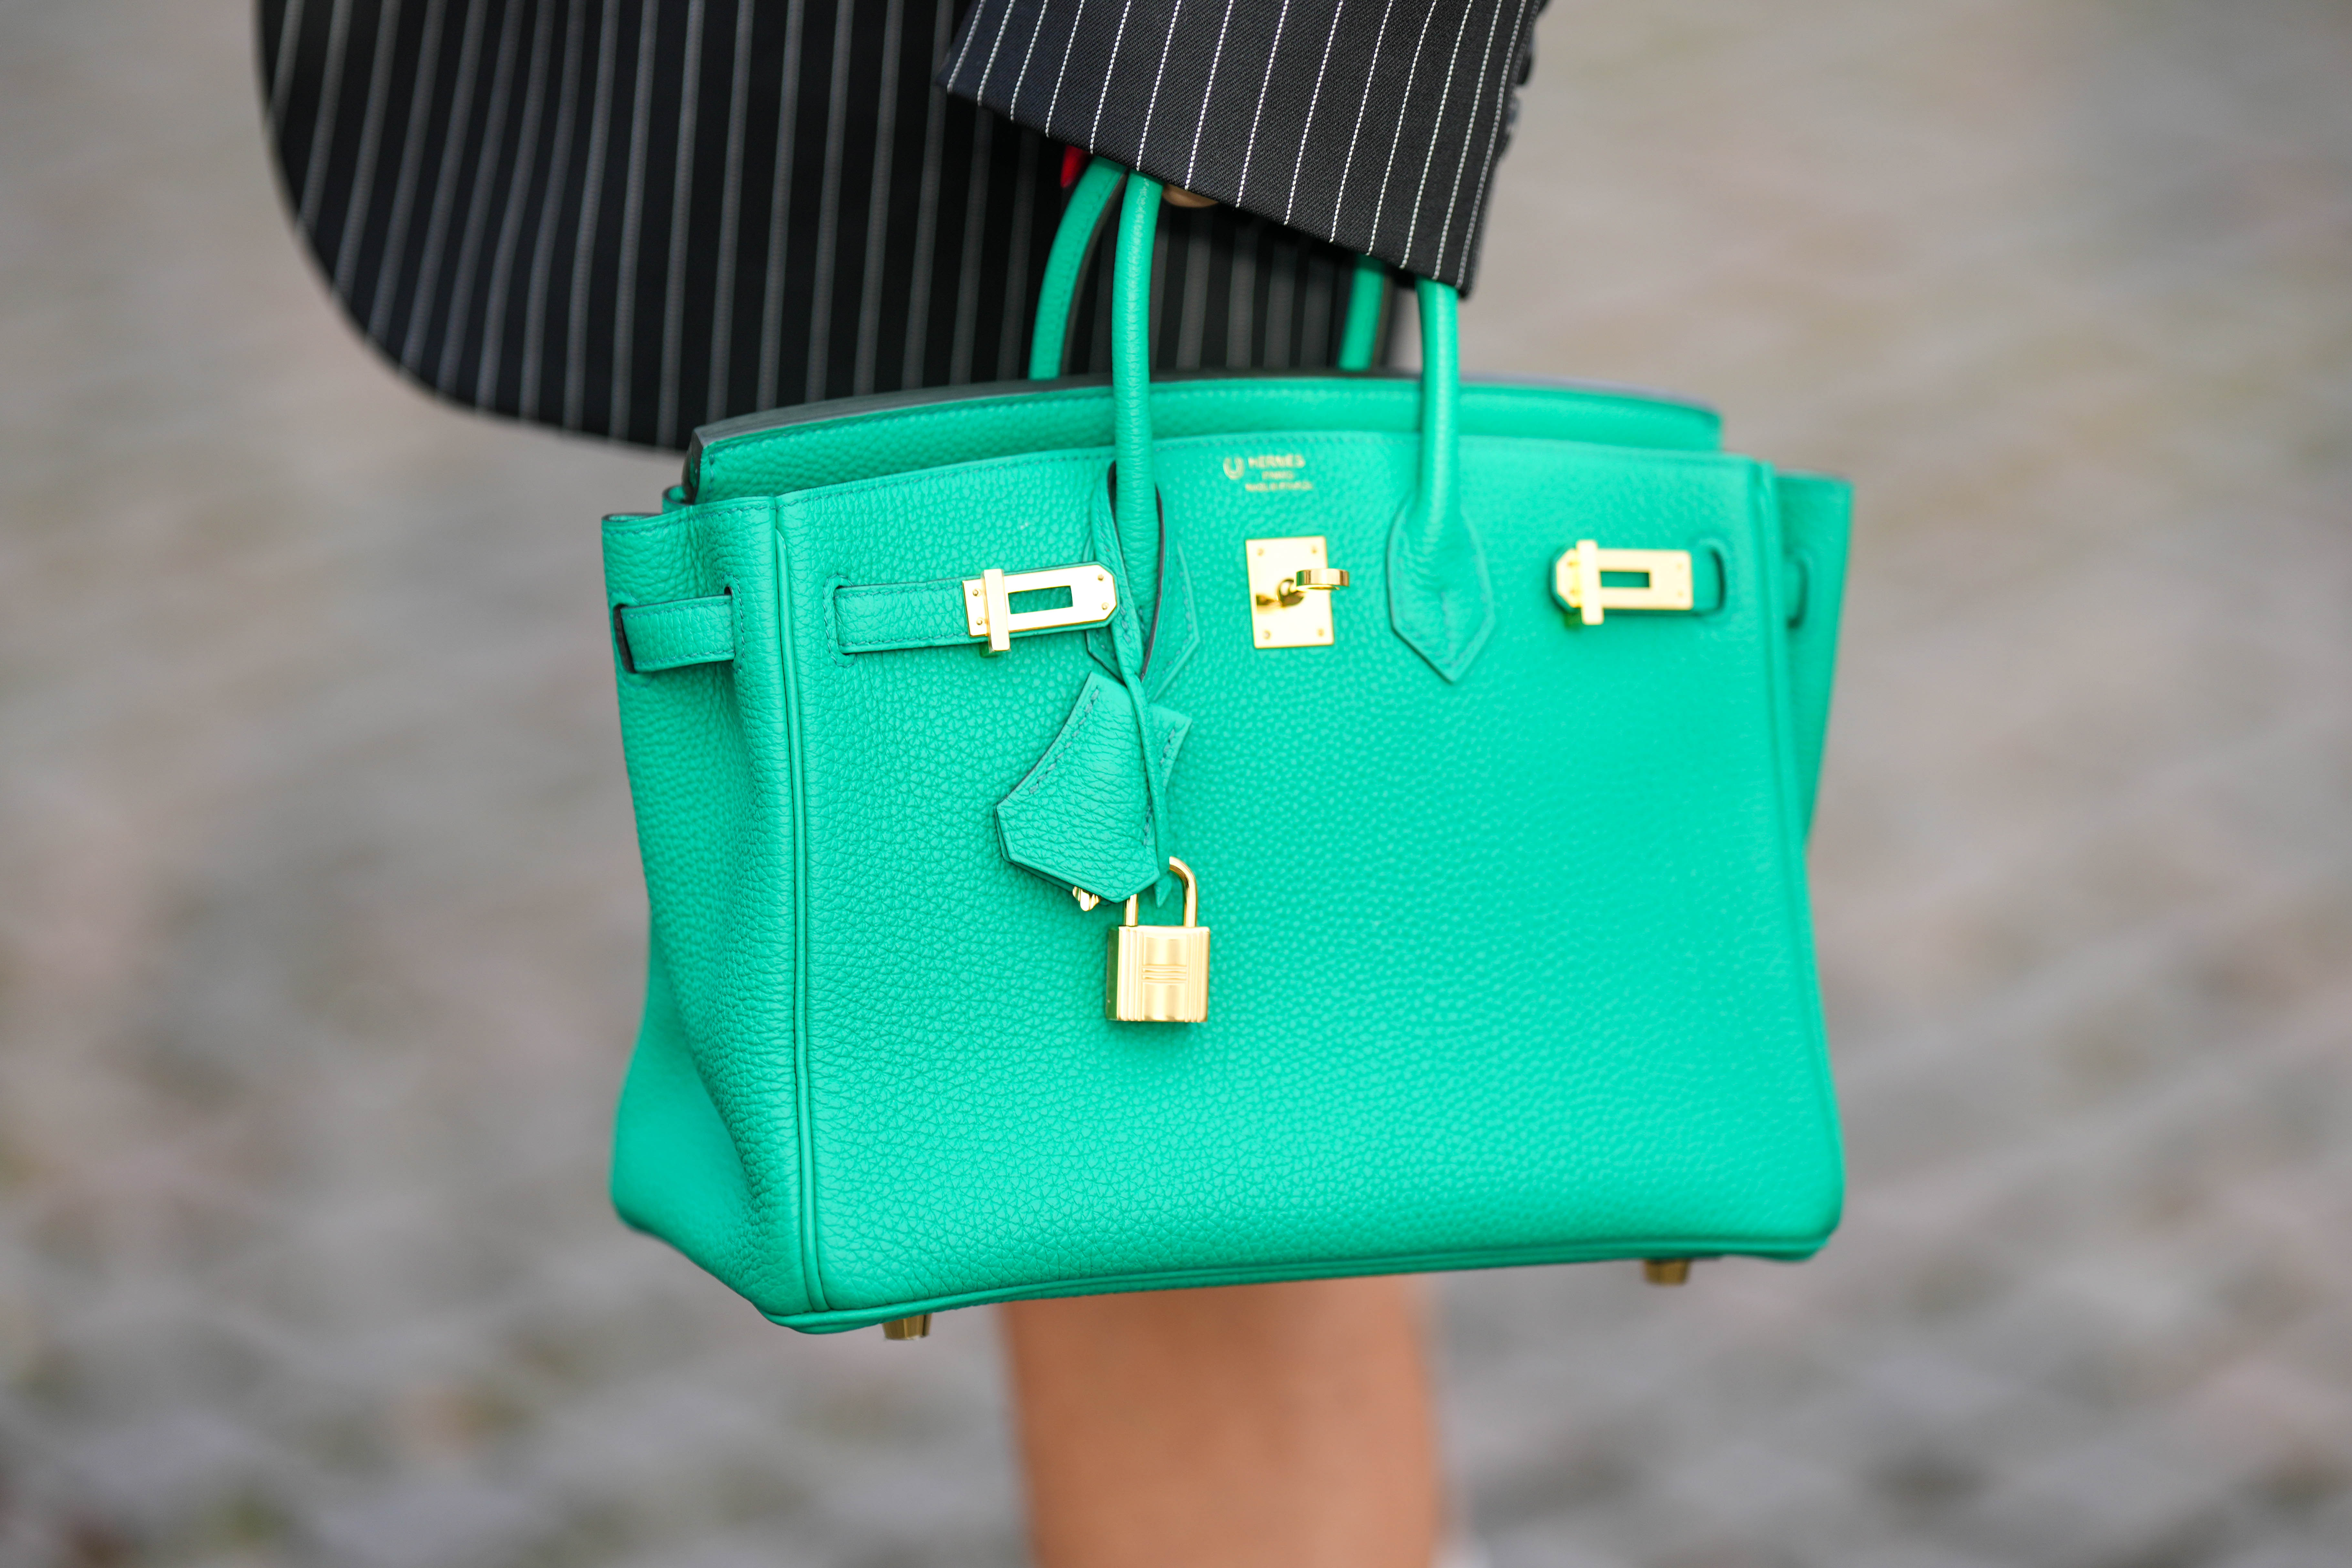 Hermès wins trademark NFT lawsuit in first-of-its kind trial - Forbes ...